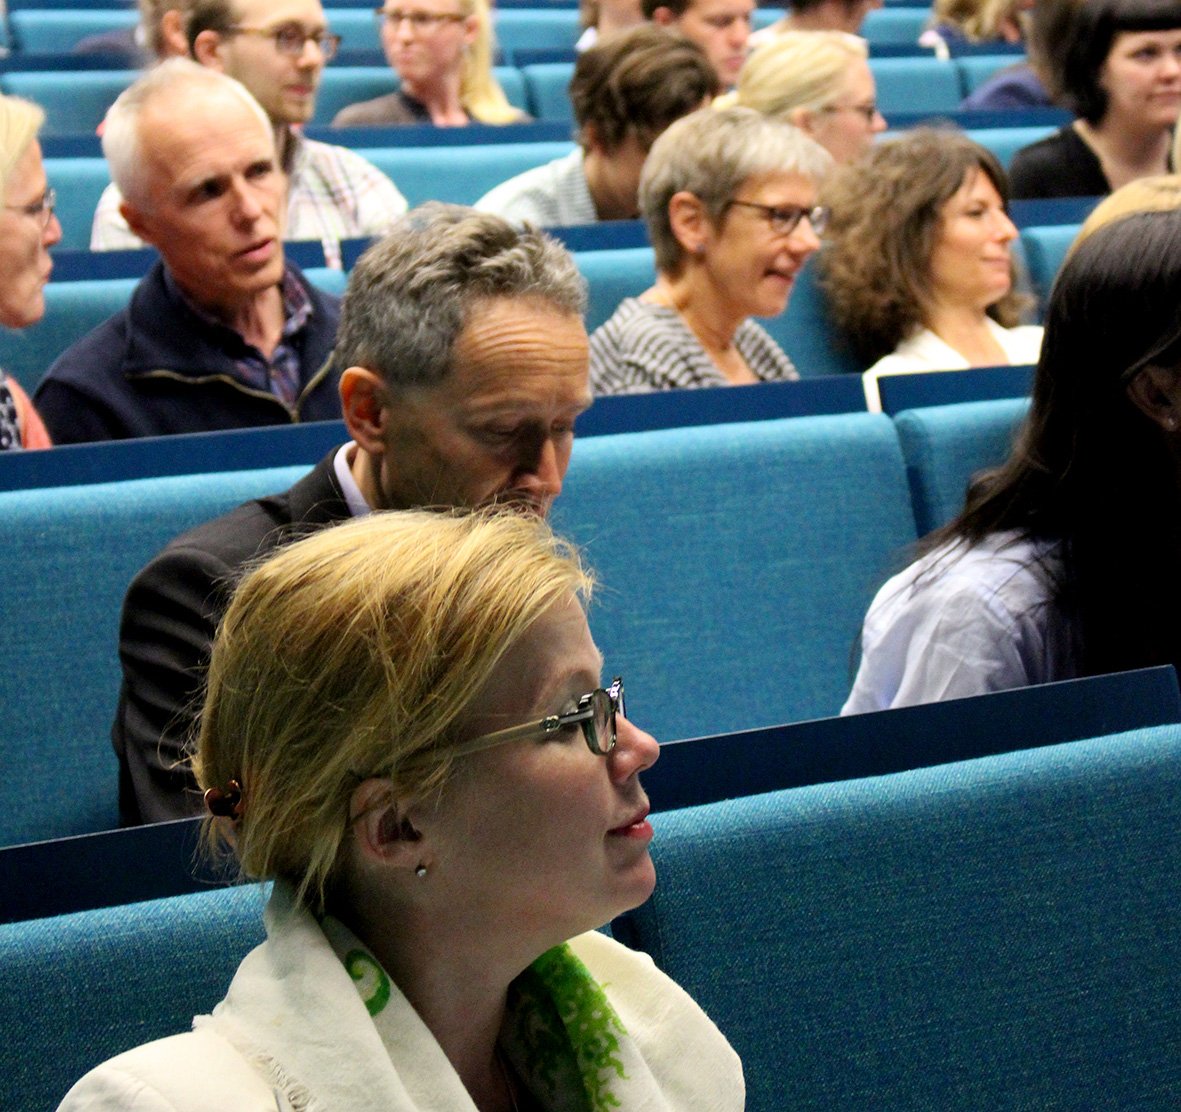 Researchers with the Department of Public Health Sciences gathered in a lecture hall.